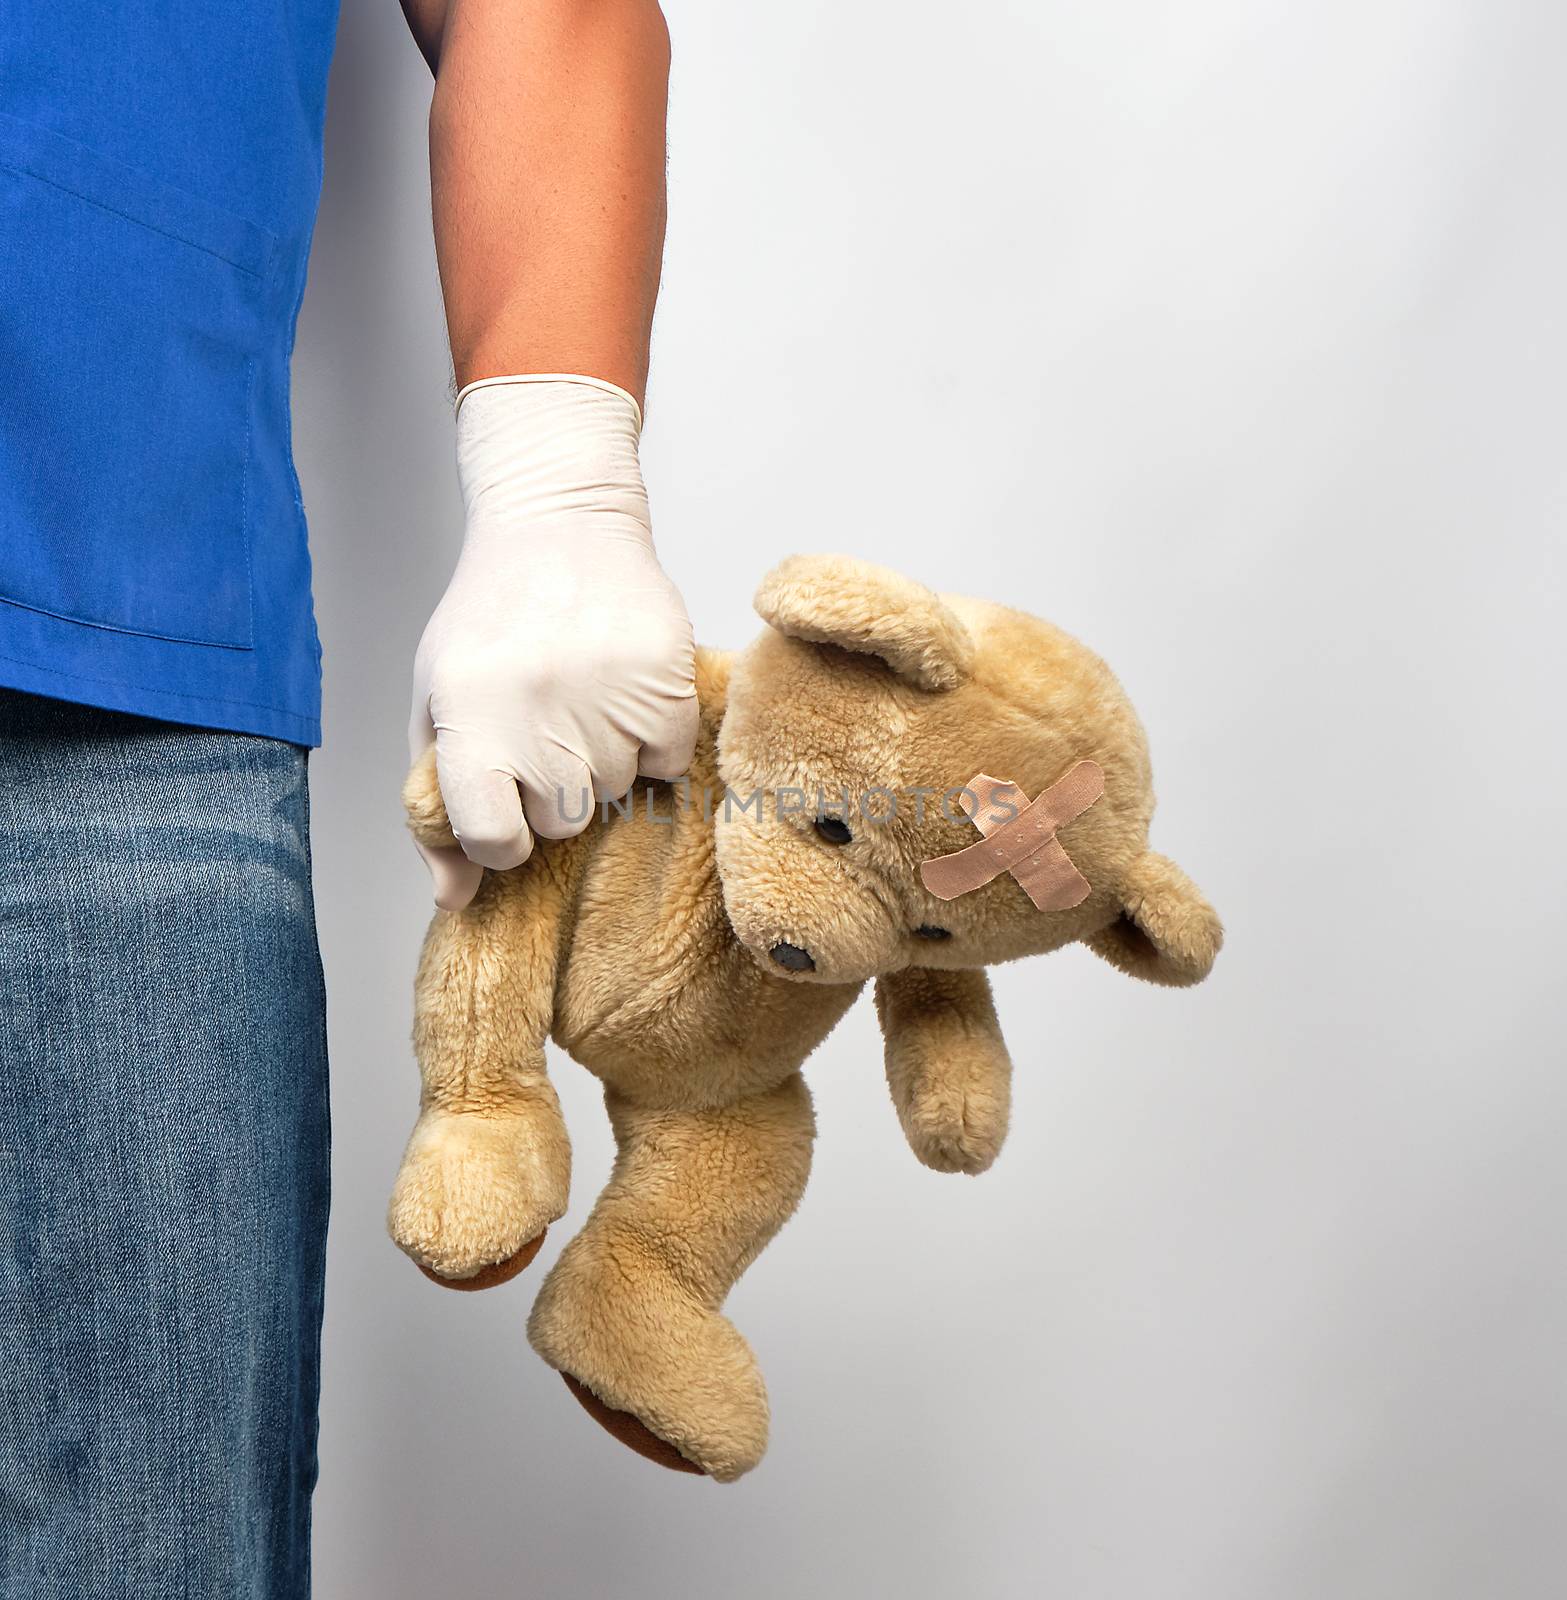 doctor in blue uniform and white latex gloves holding a brown teddy bear, pediatrics concept, copy space 